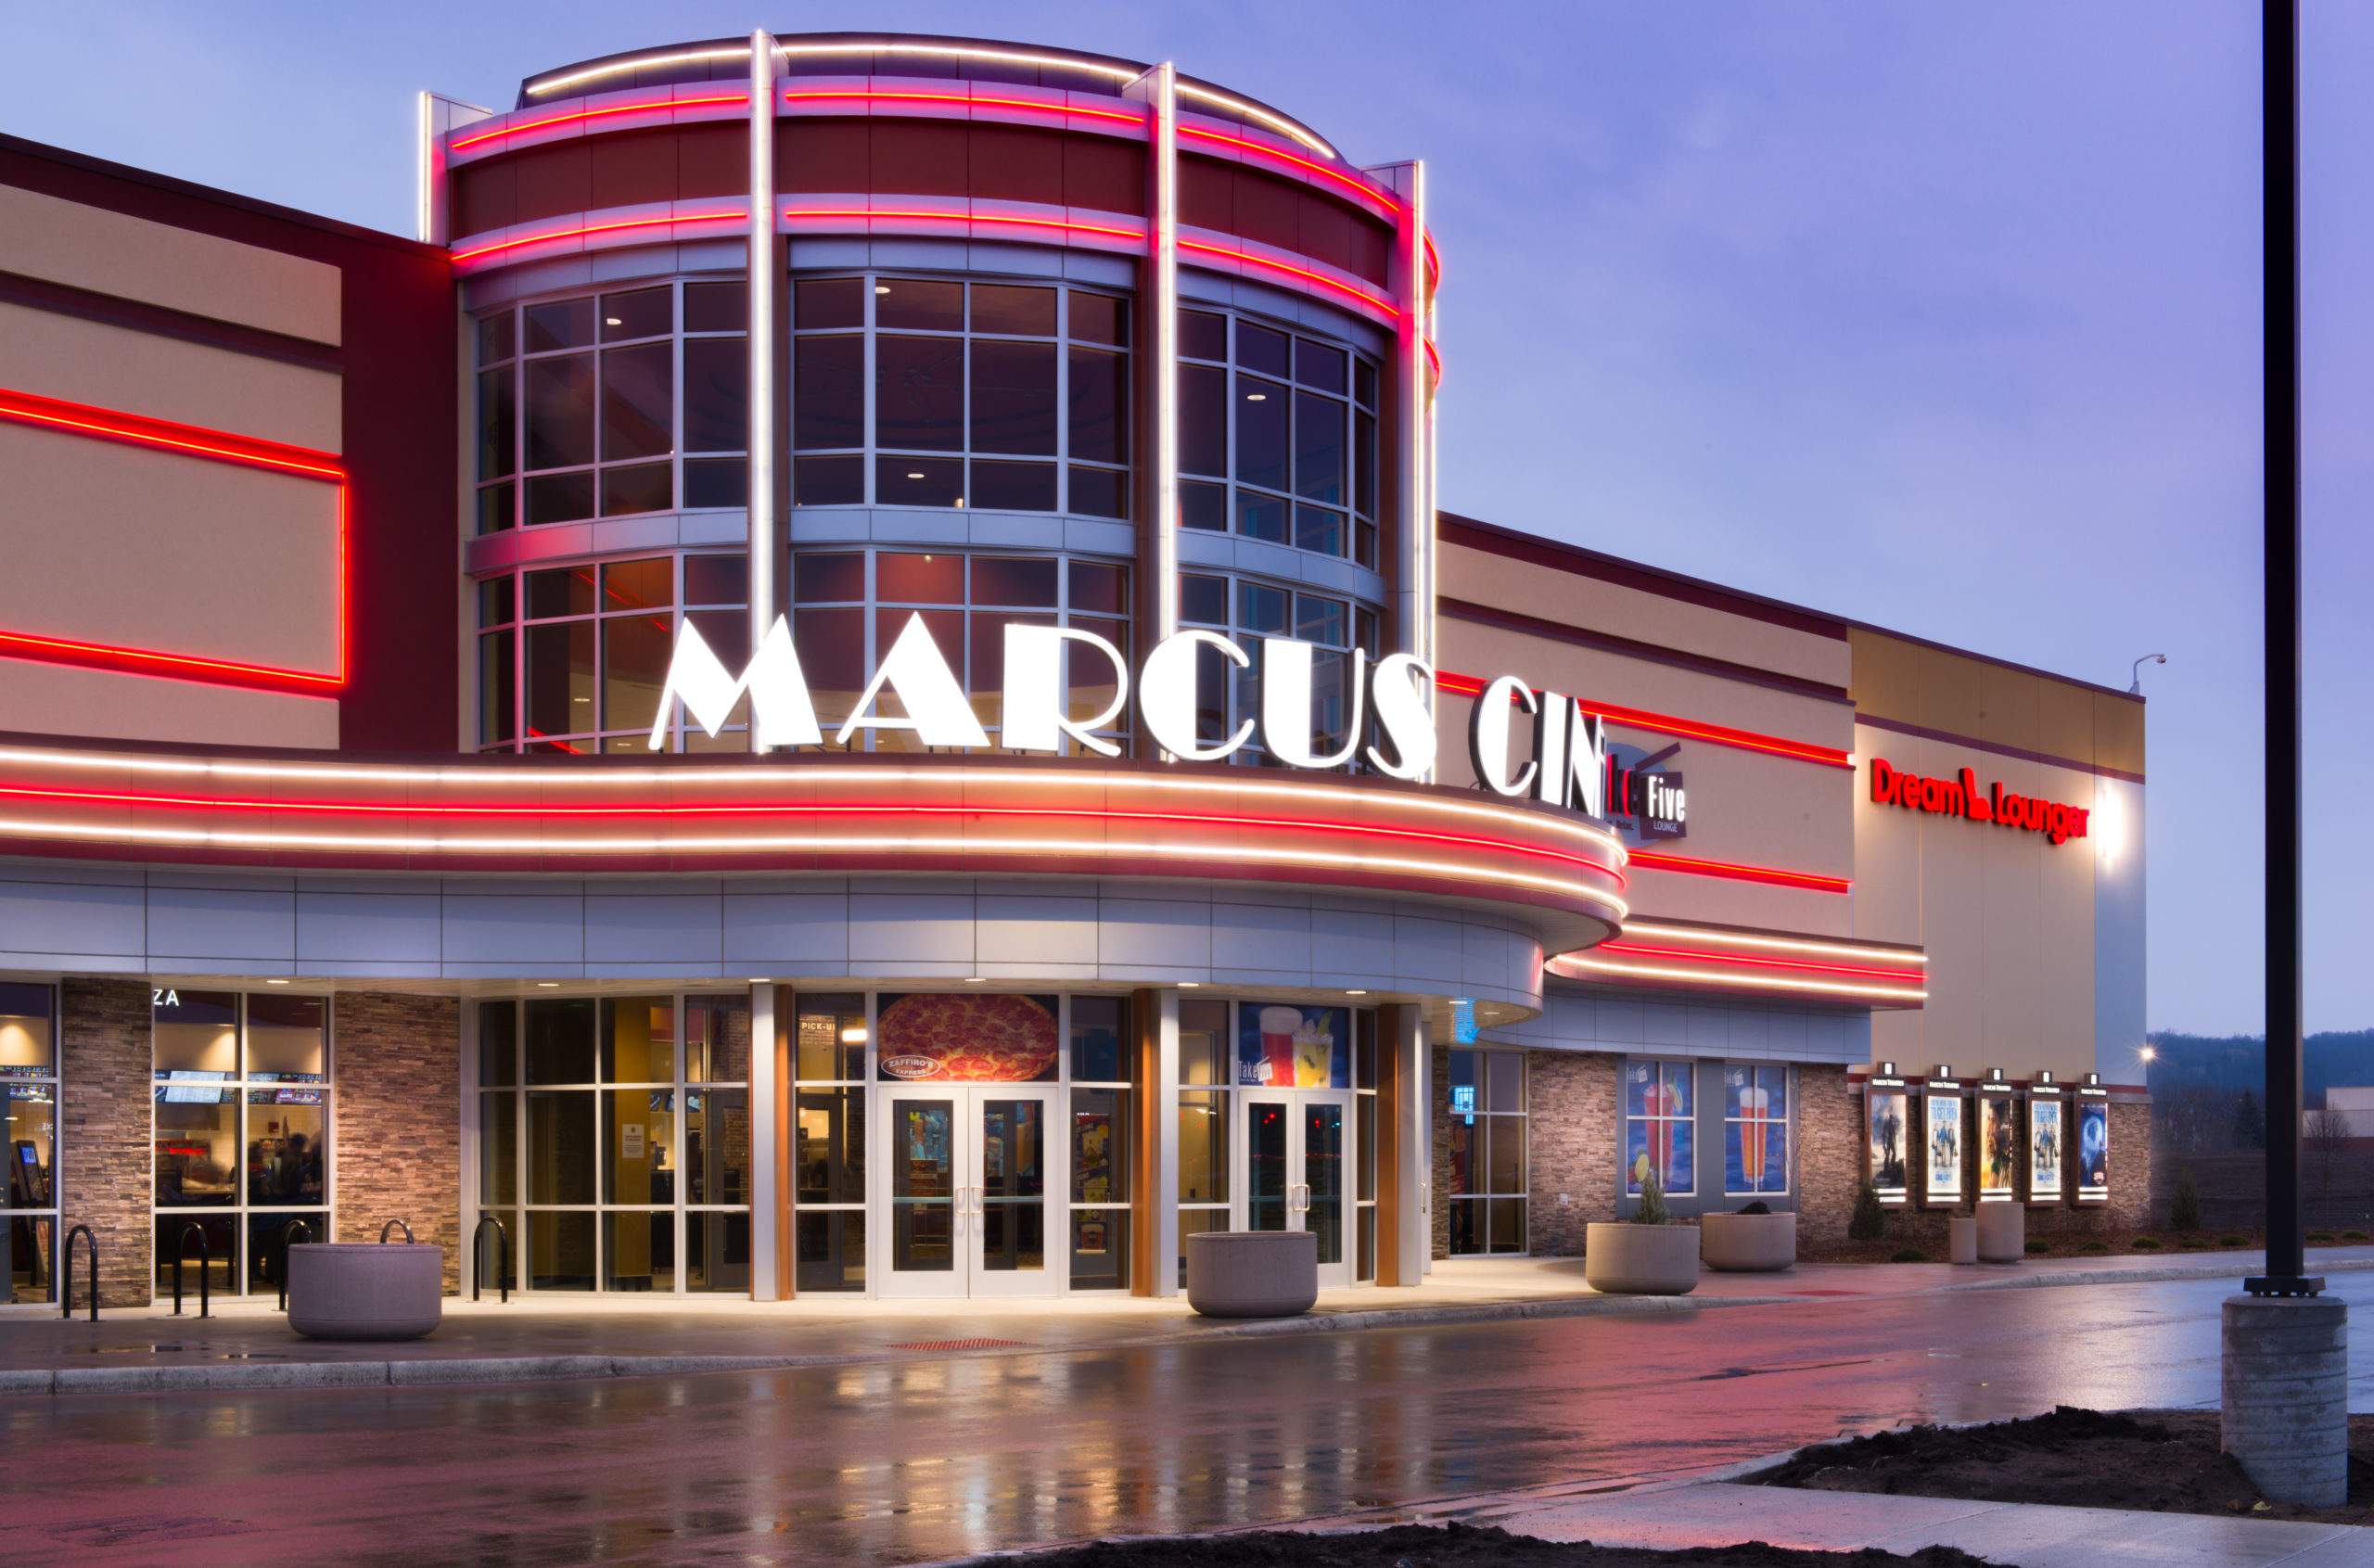 For Marcus Theatres, Rokt delivers 8x more monthly revenue than Google AdSense